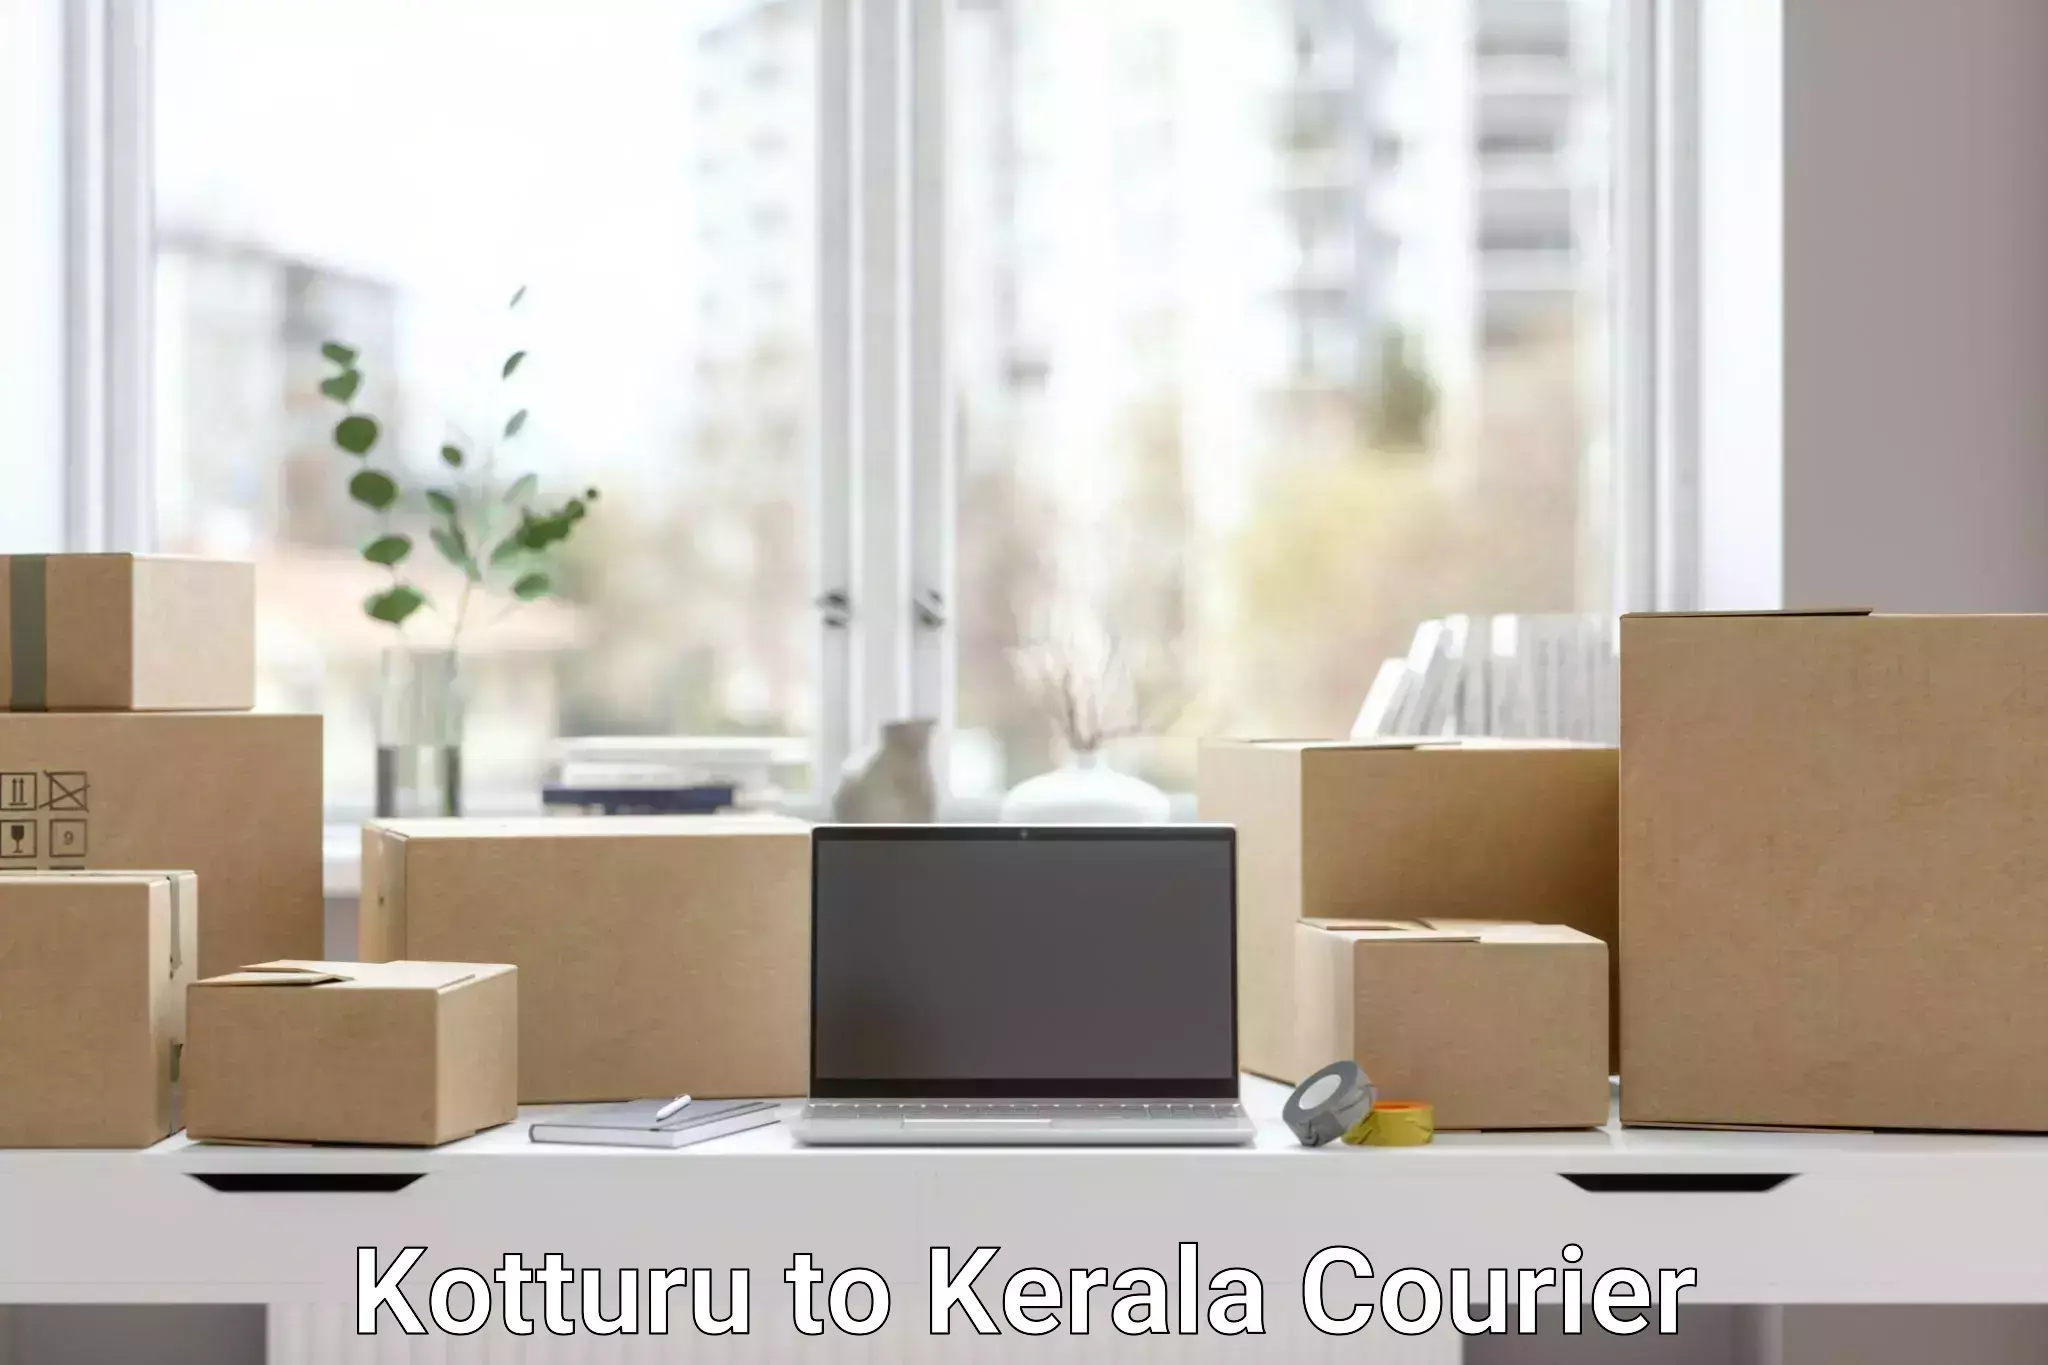 Small parcel delivery Kotturu to Cochin University of Science and Technology